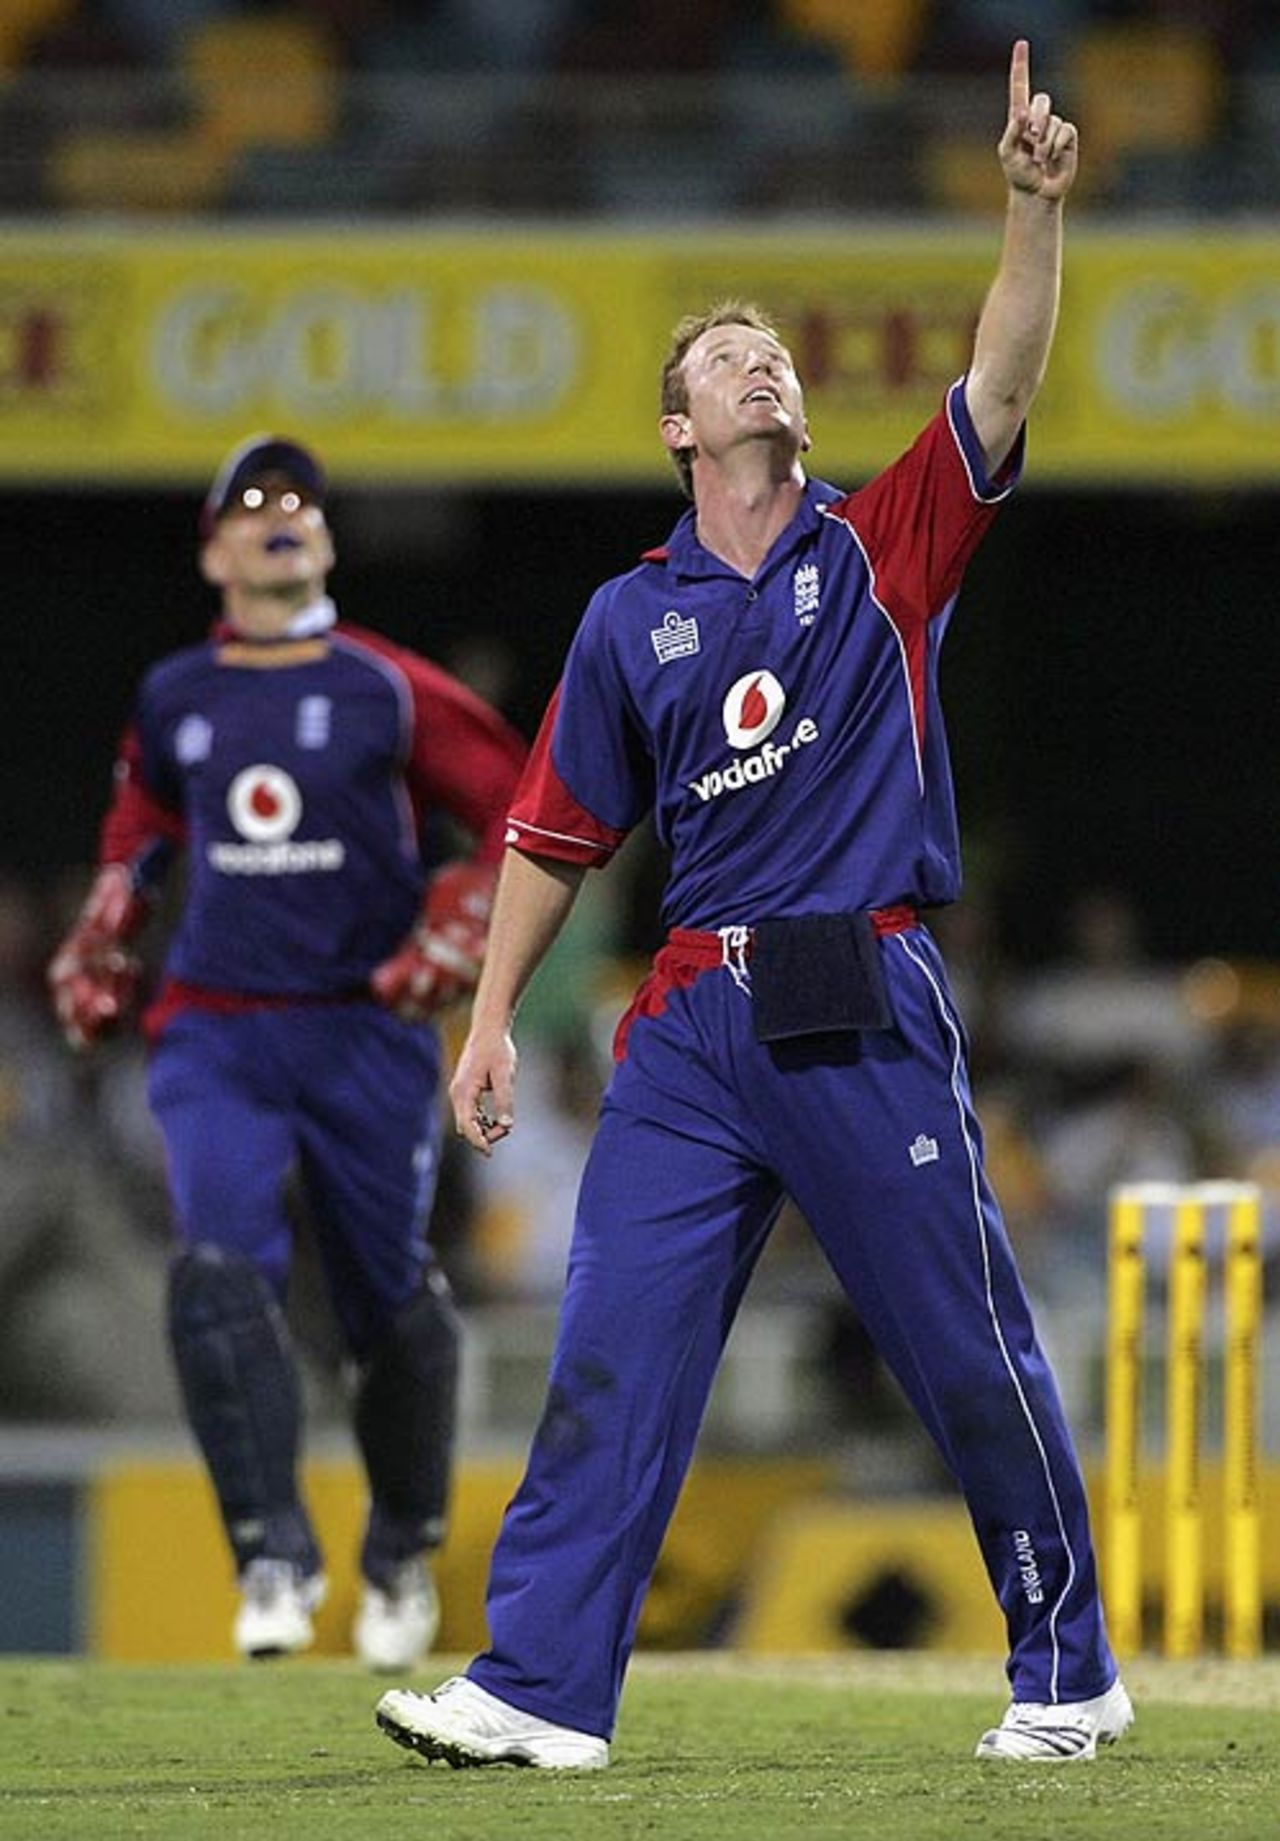 Paul Collingwood celebrates the wicket of Daniel Vettori, as England close in on victory, England v New Zealand, CB Series, 12th match, Brisbane, February 6, 2007